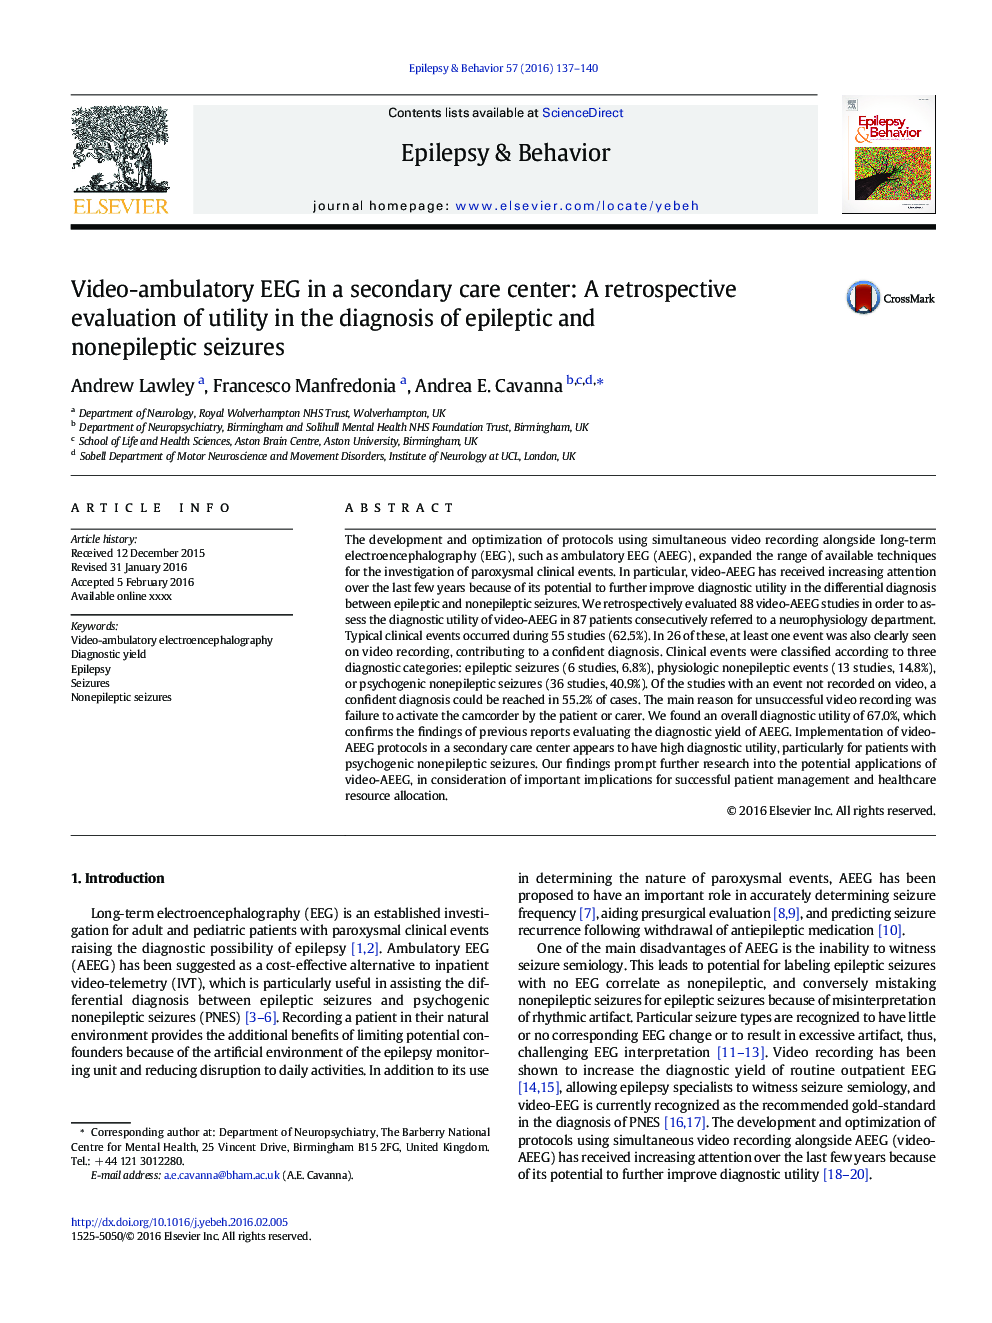 Video-ambulatory EEG in a secondary care center: A retrospective evaluation of utility in the diagnosis of epileptic and nonepileptic seizures